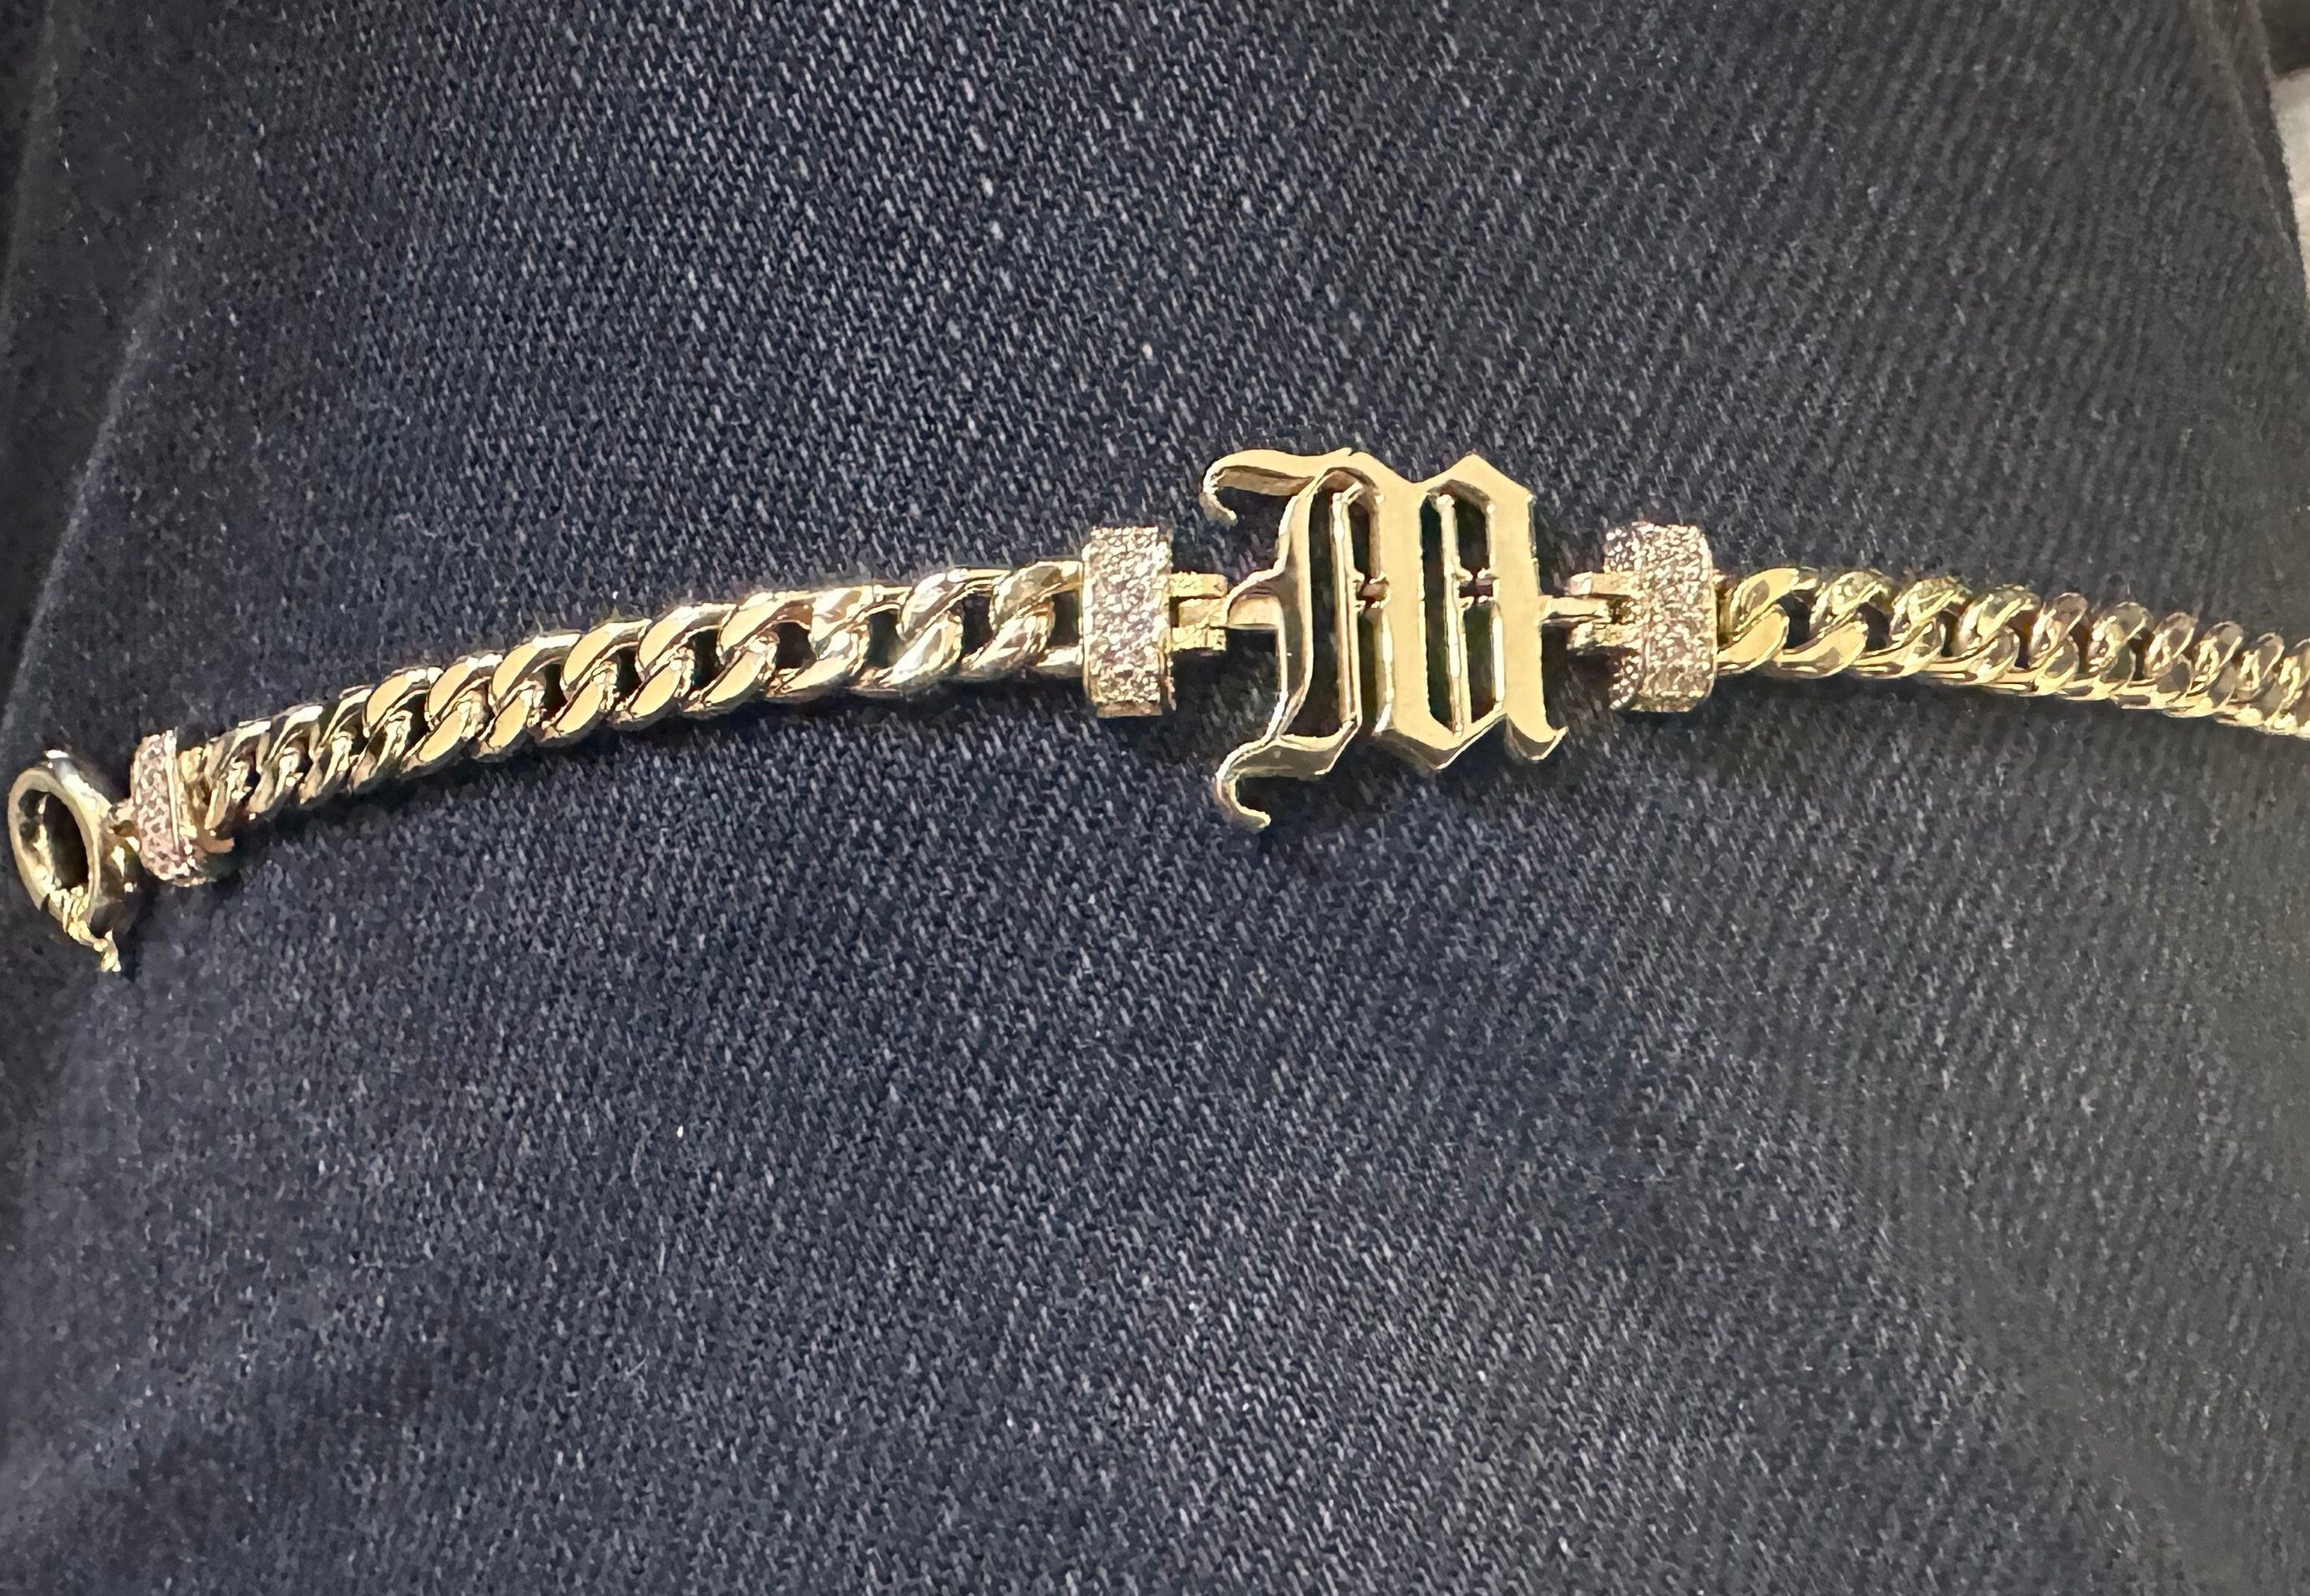 14K Gold Cuban Link Old English Initial Bracelet, 5mm Curb Letter Chain, Custom Gothic Style Name Bracelet, Personalized Gold Bracelet